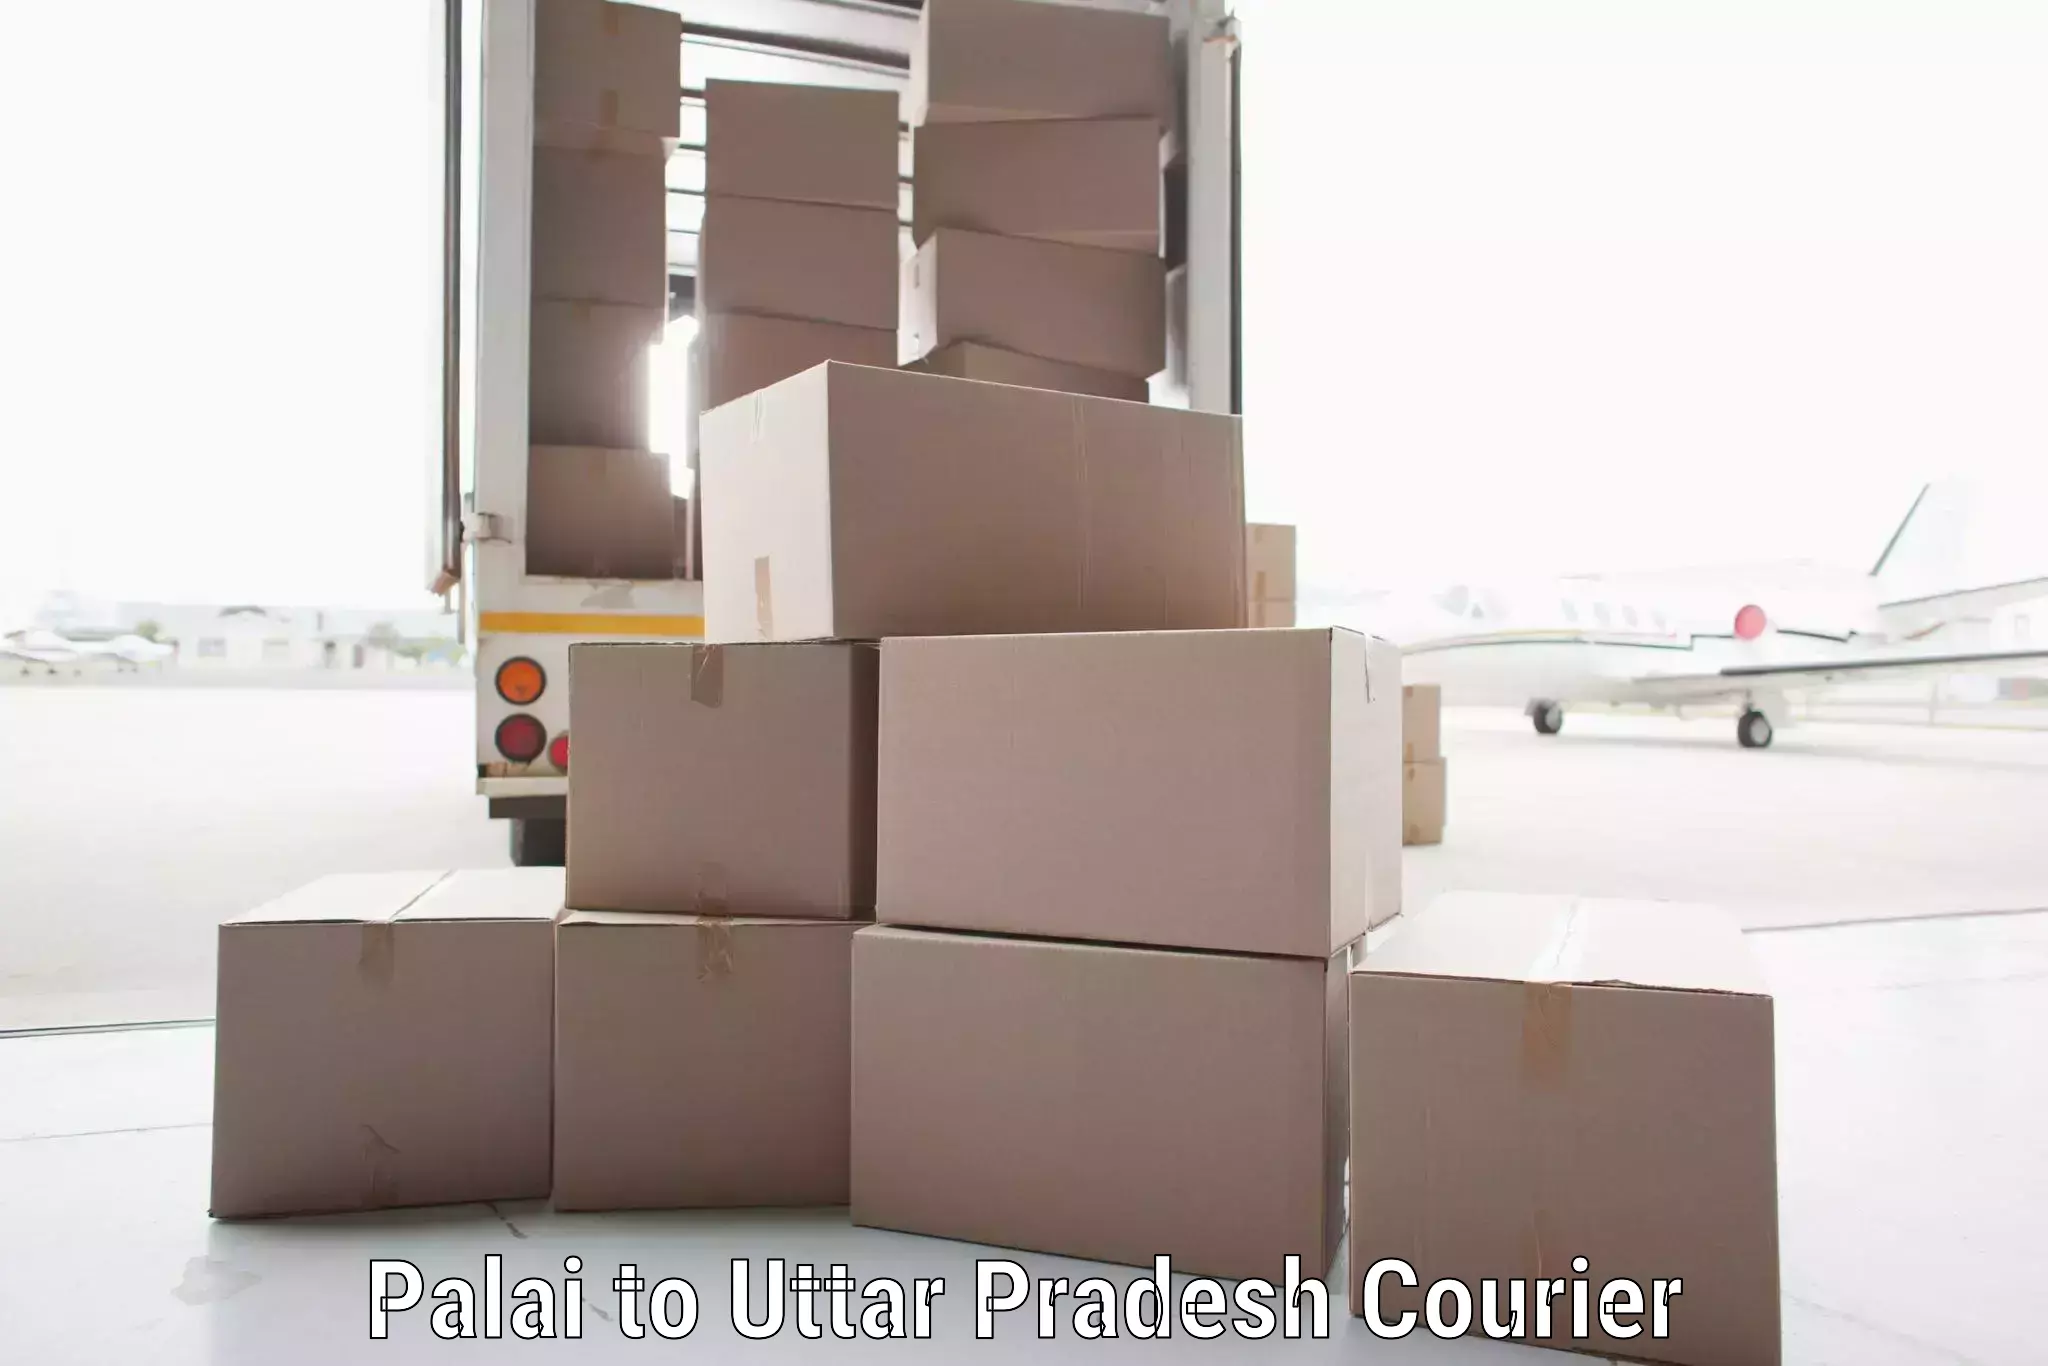 Reliable package handling Palai to Rath